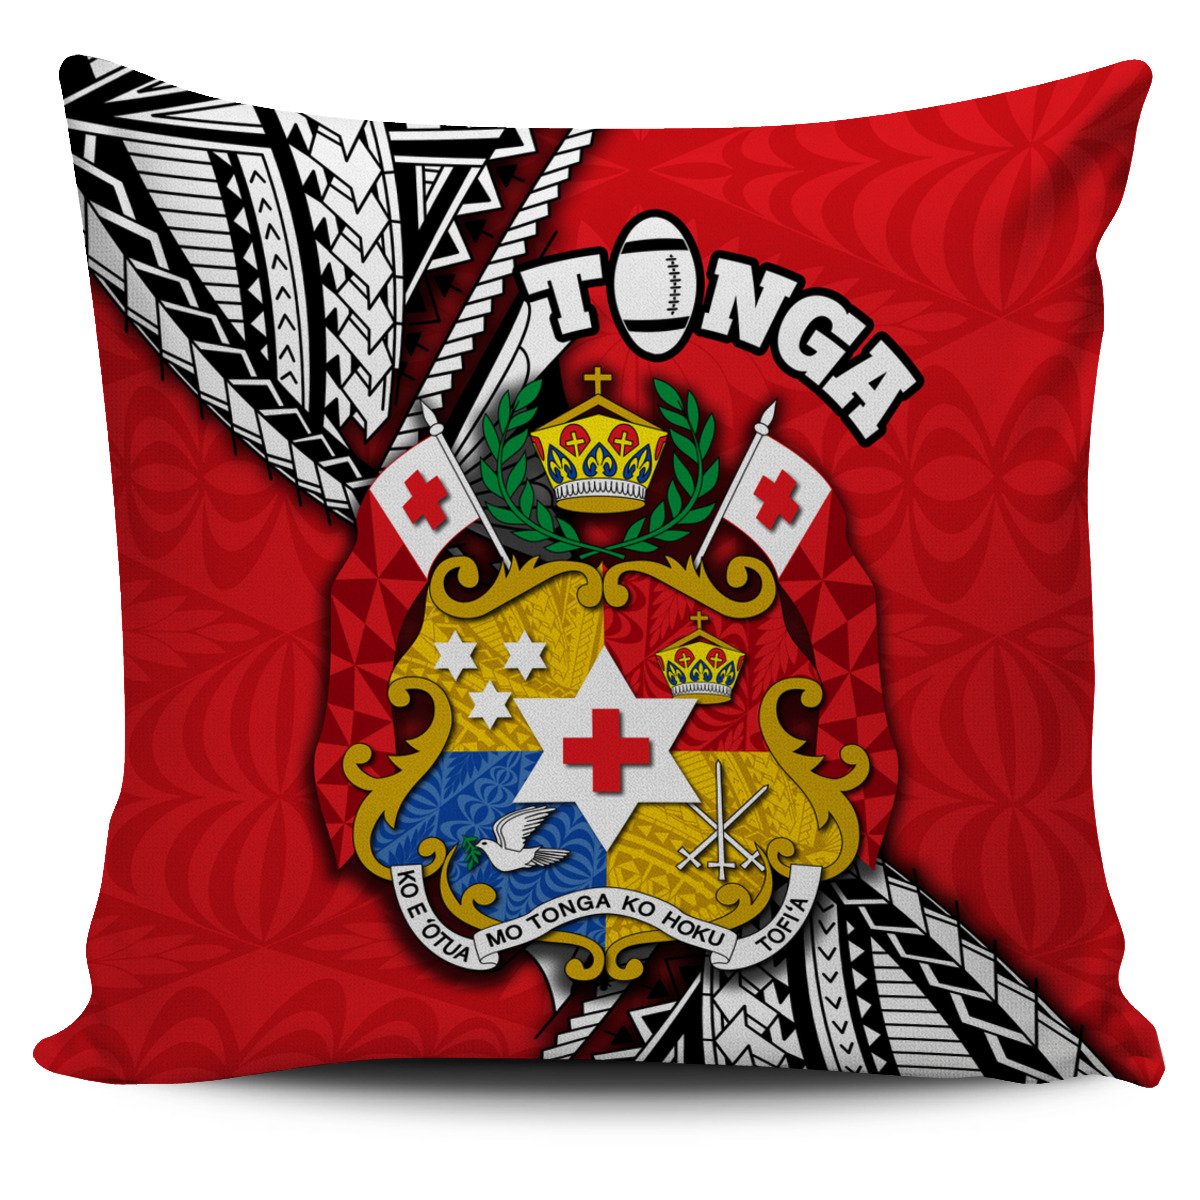 Tonga Rugby Pillow Cover Polynesian Style Pinwheel Pillow Cover One Size Red - Polynesian Pride